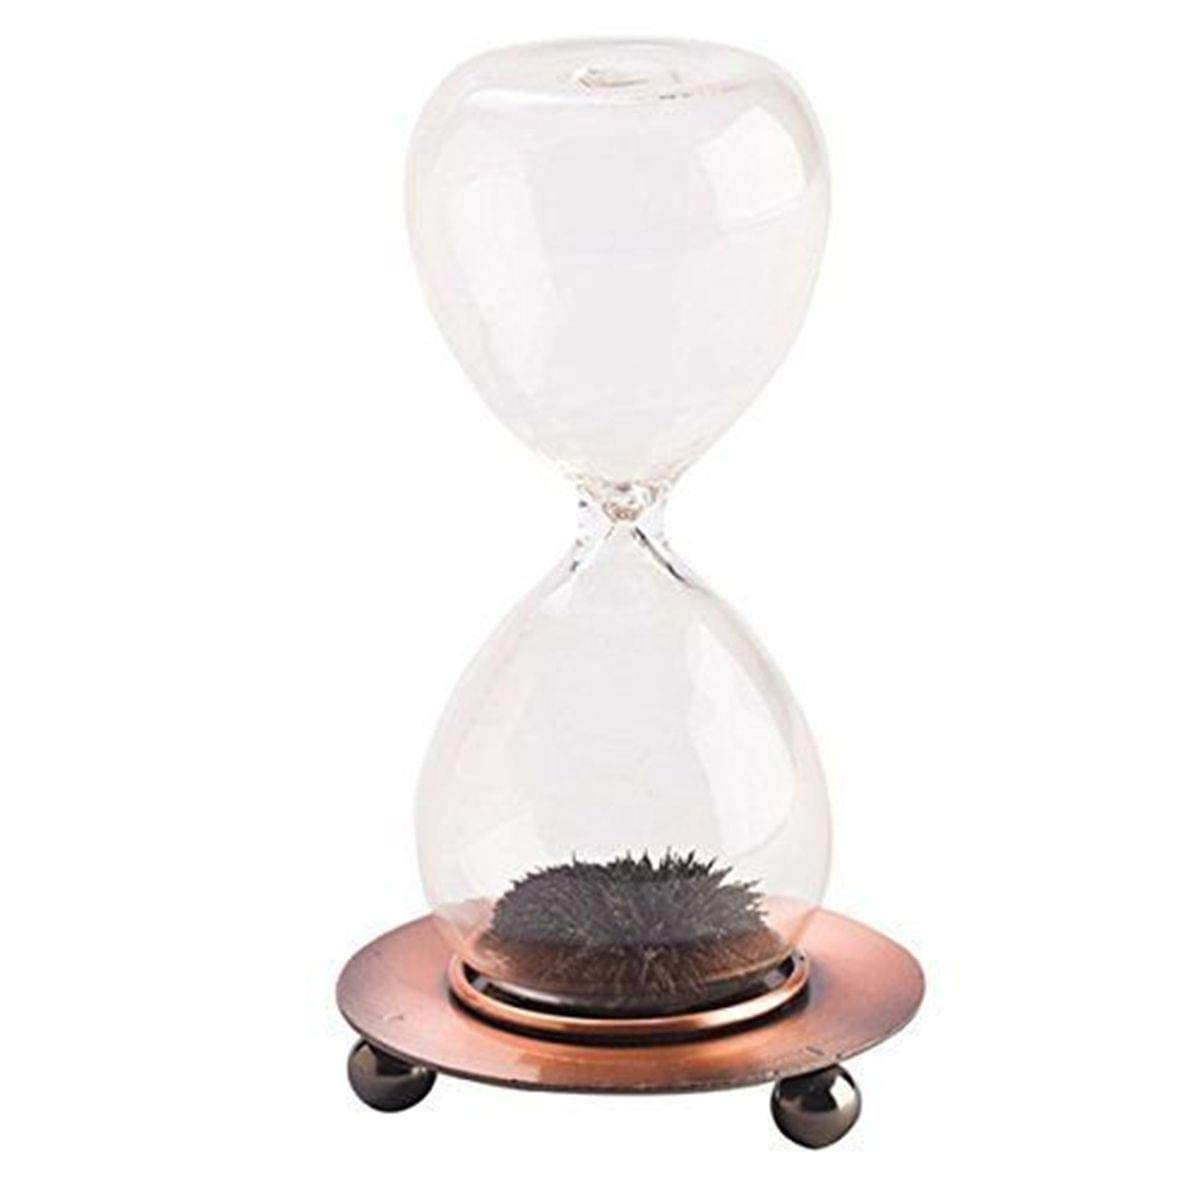 WARM FUZZY Toys Magnetic Hourglass - 1 Minute Sand Timer - Large Sand Clock with Black Magnet Iron Powder & Metal Base, Sand Watch - Hourglass Sandglass for Office Desk and Home Decorative